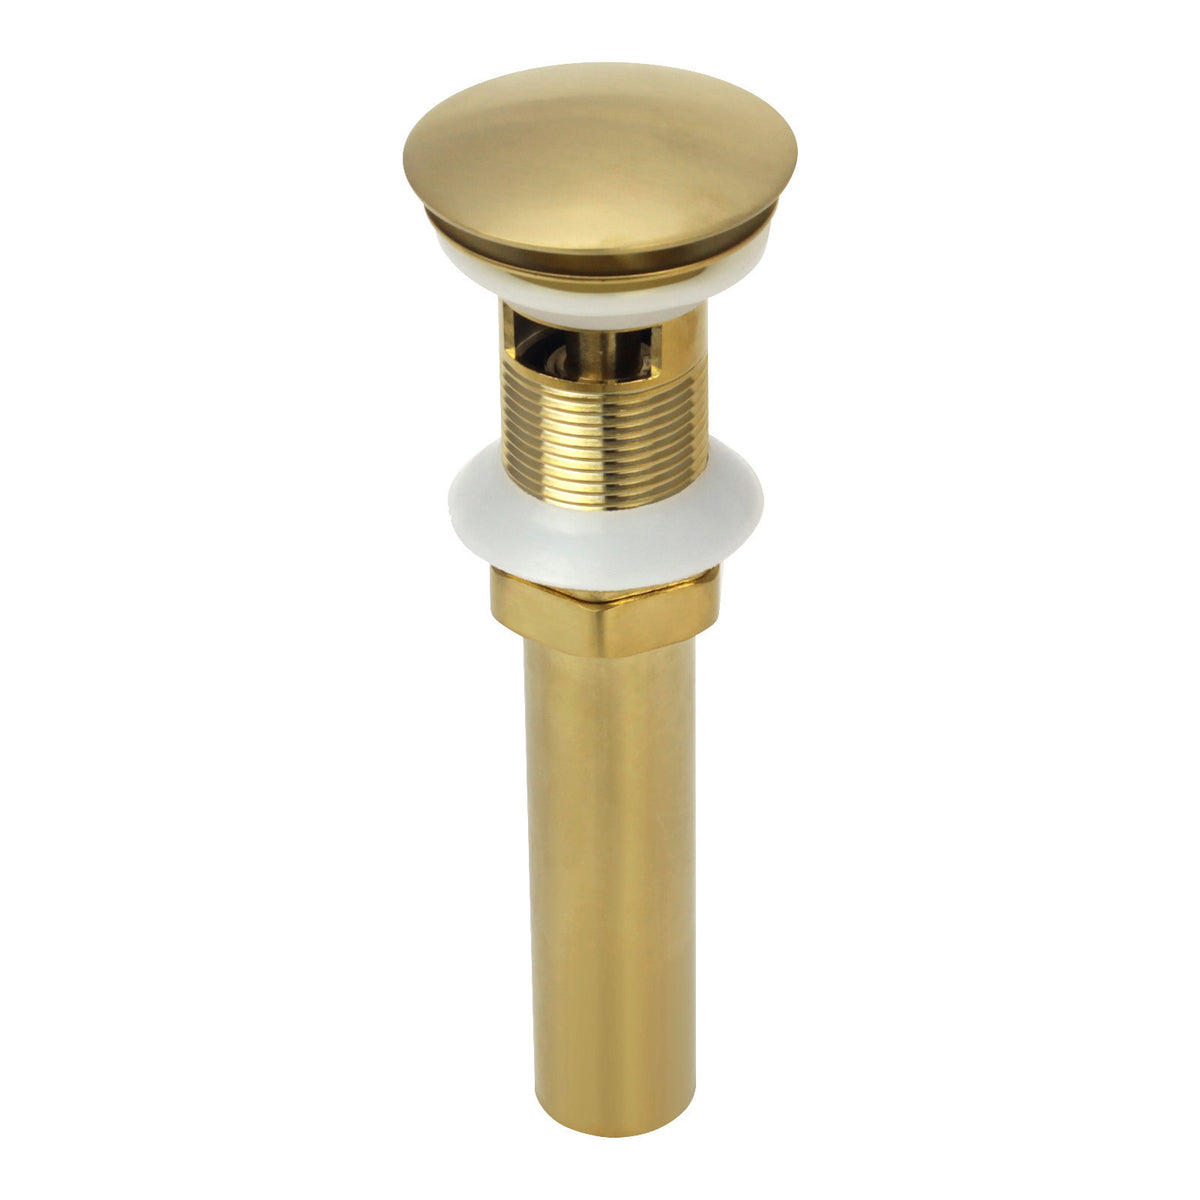 Brushed Gold Pop up Drain Stopper With Overflow - AK82011BTG